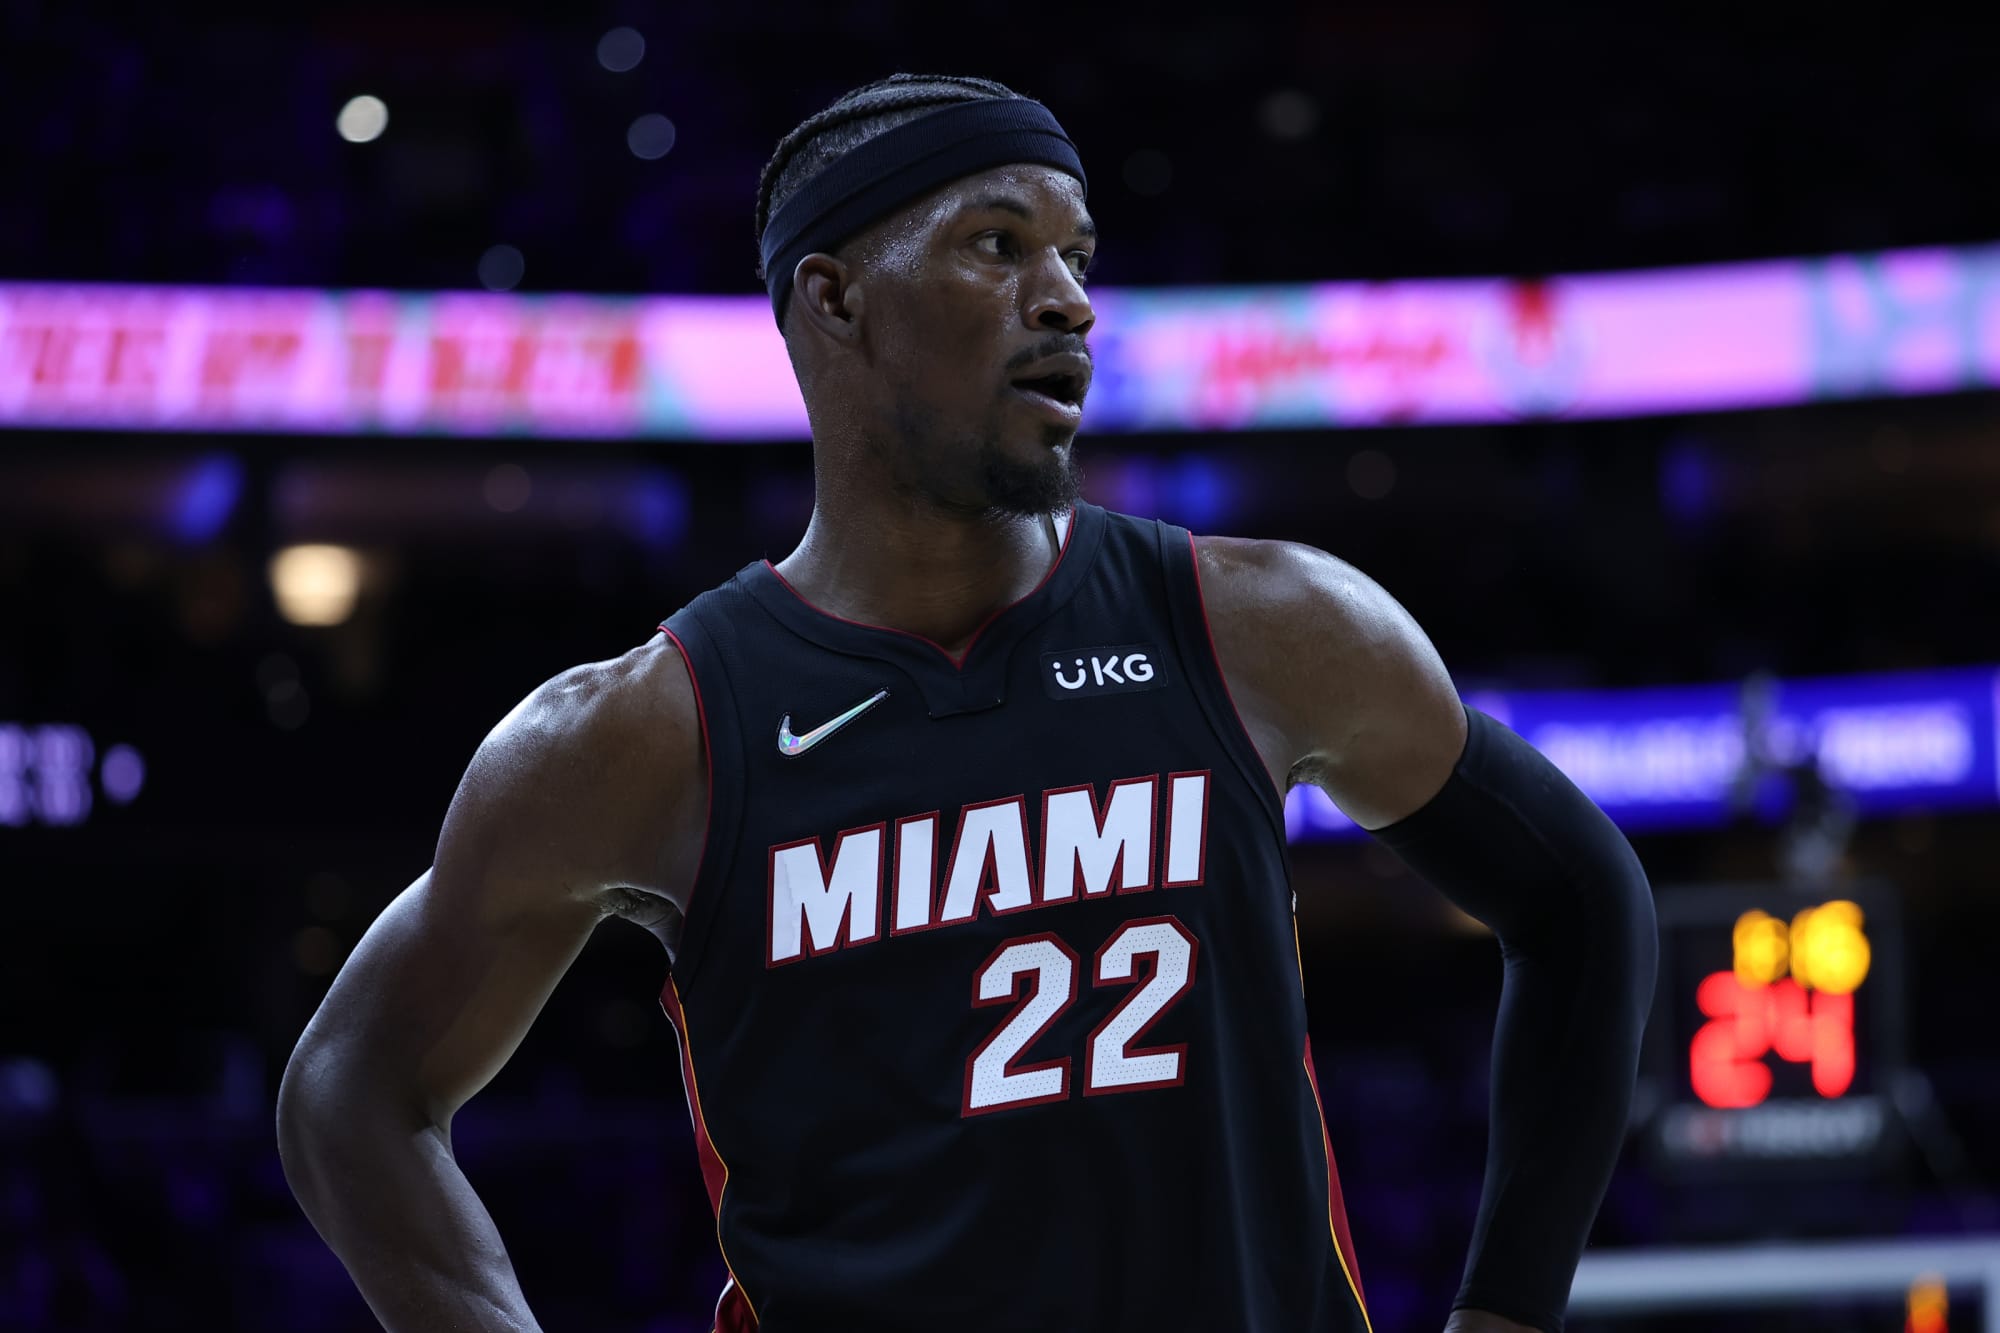 For Heat, the legend of 'Playoff Jimmy' continues to grow